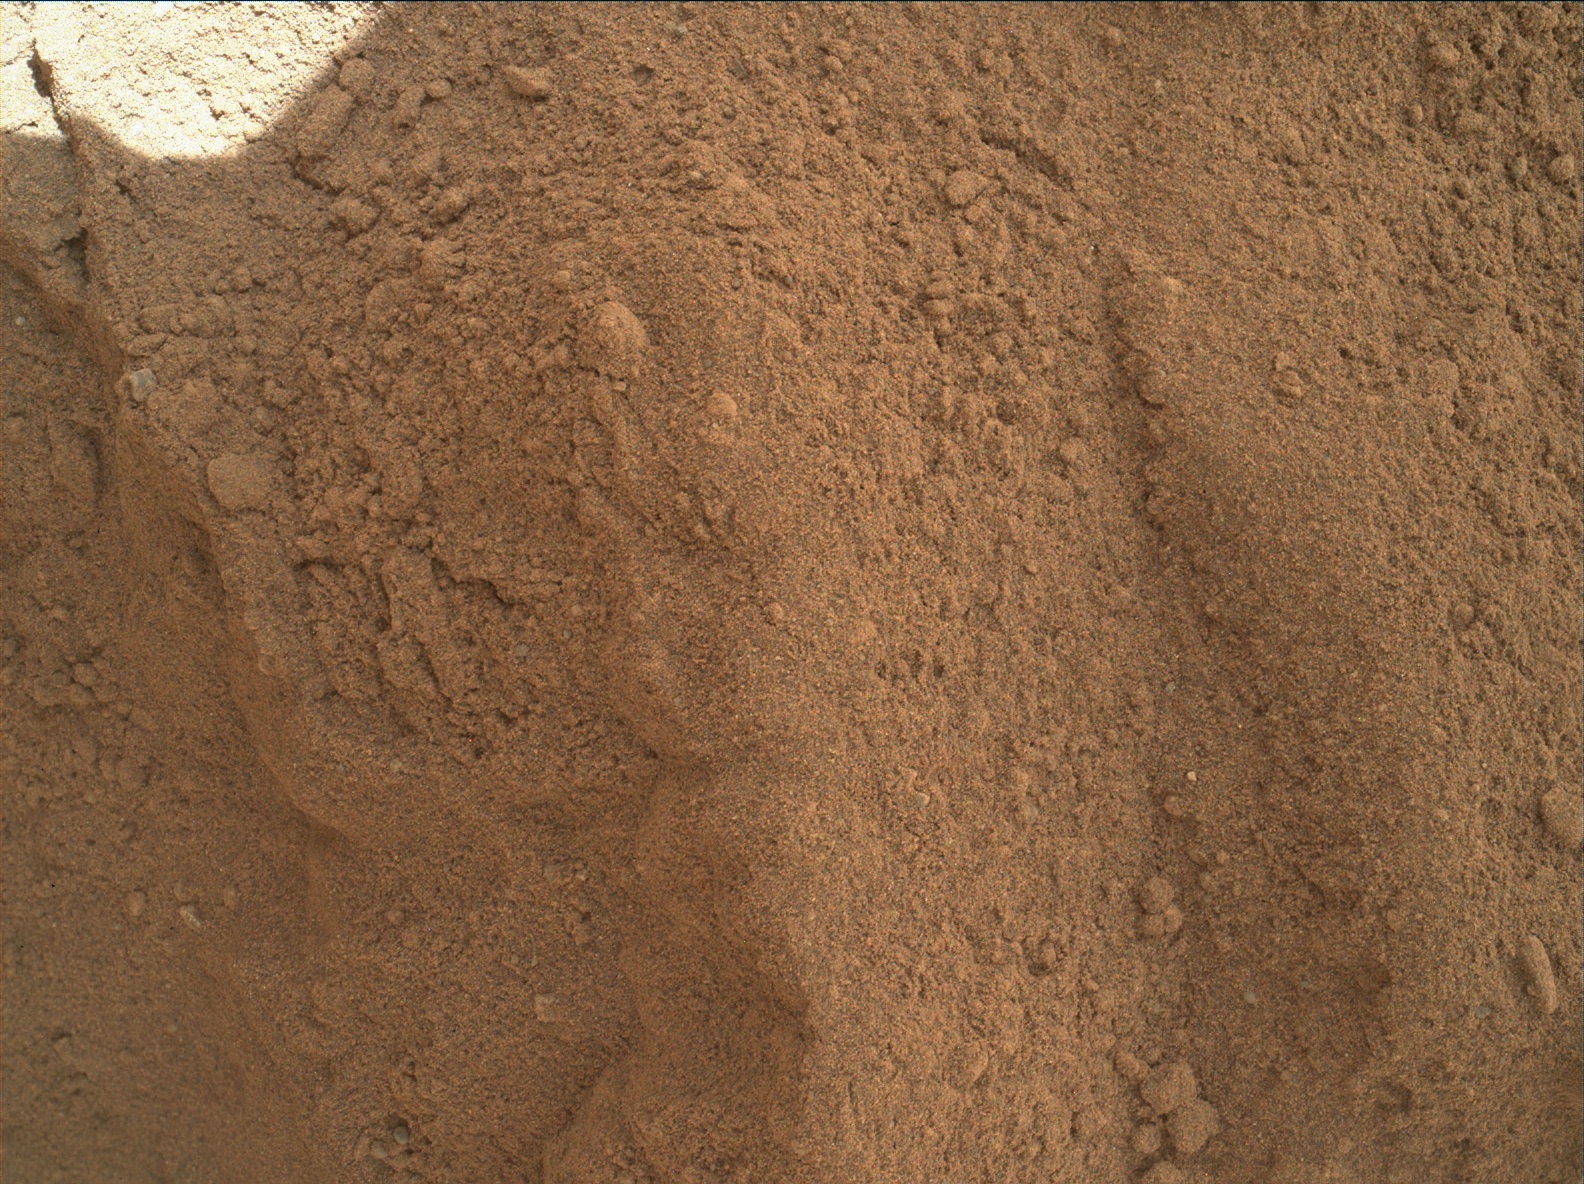 Nasa's Mars rover Curiosity acquired this image using its Mars Hand Lens Imager (MAHLI) on Sol 673